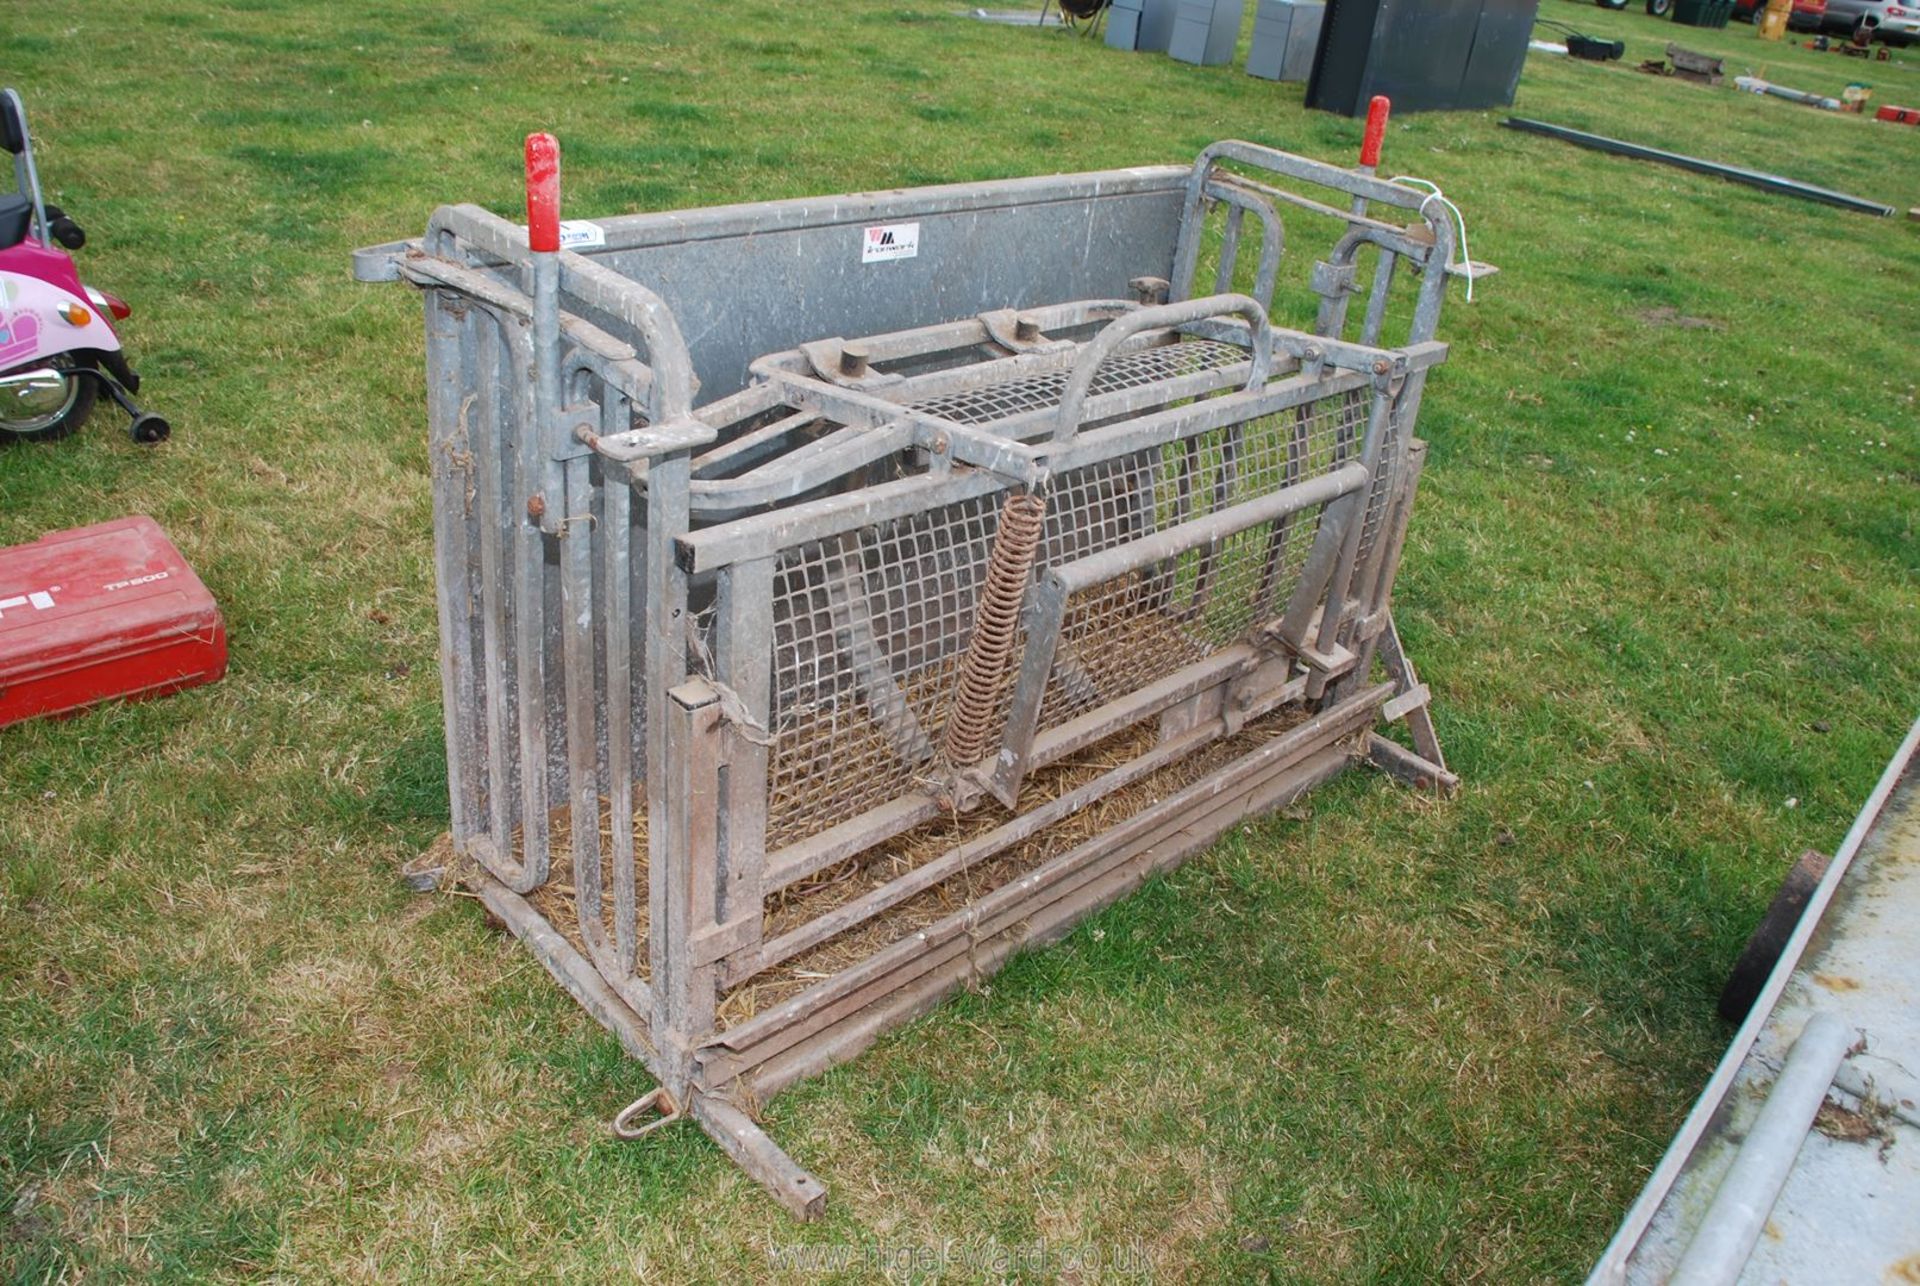 A sheep turning crate.